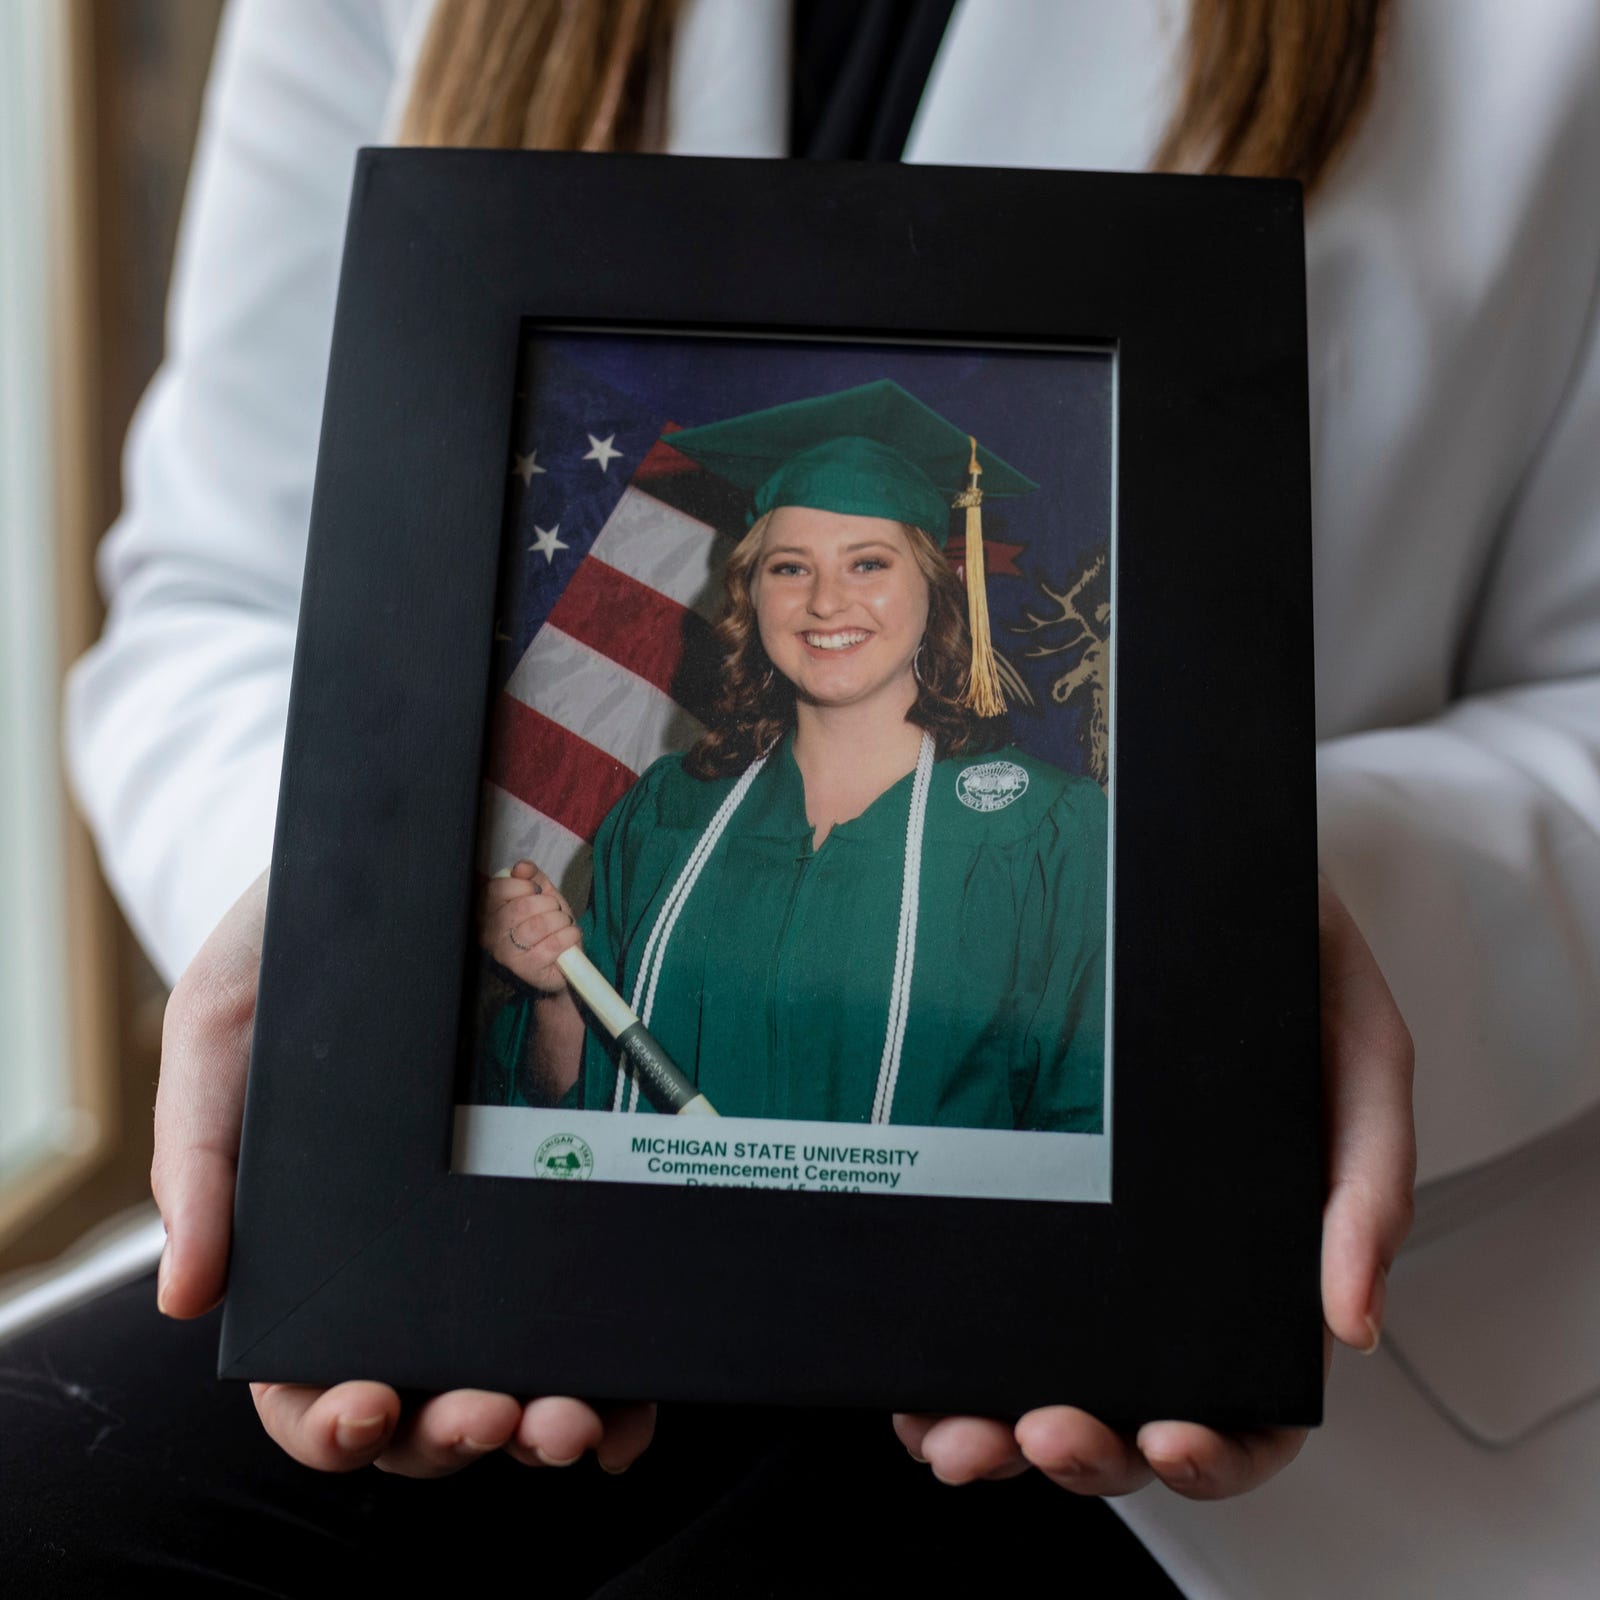 Hannah Smith, 25, holds a portrait of her during the Michigan State University commencement ceremony inside her home in Genesee County, Michigan, on Thursday, Dec. 8, 2022. Smith filed a complaint with the Office for Civil Rights alleging Michigan State mishandled her sexual harassment case.  (Via OlyDrop)